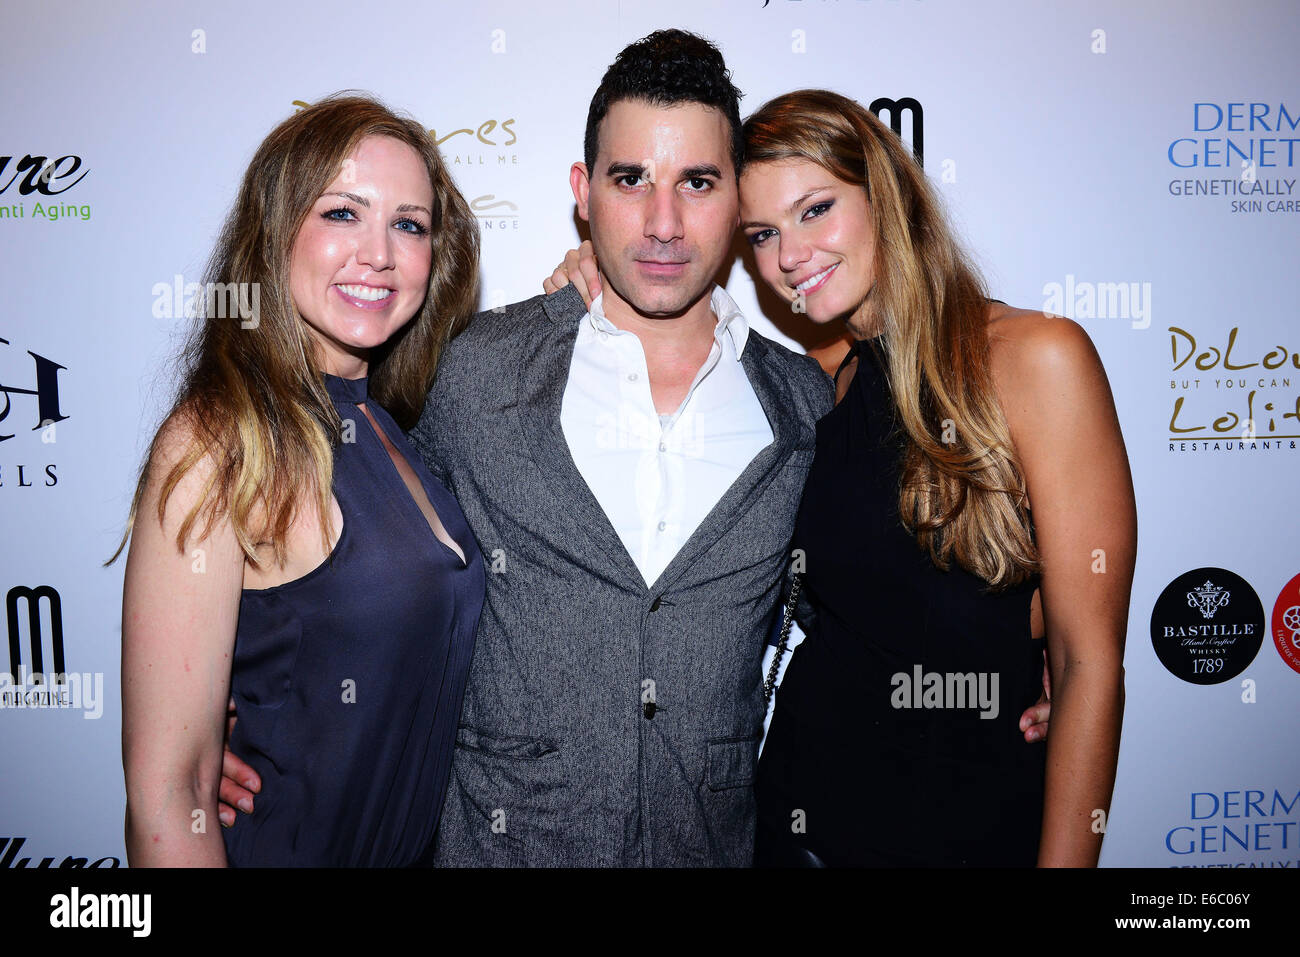 MSM (Miami Shoot Magazine) debut cover release party held at DOLORES but you can call me LOLITA restaurant and lounge - Arrivals  Featuring: Jessica Stealens,Angel Rocco,Charisse Verhaert Where: Miami, Florida, United States When: 01 Feb 2014 Stock Photo